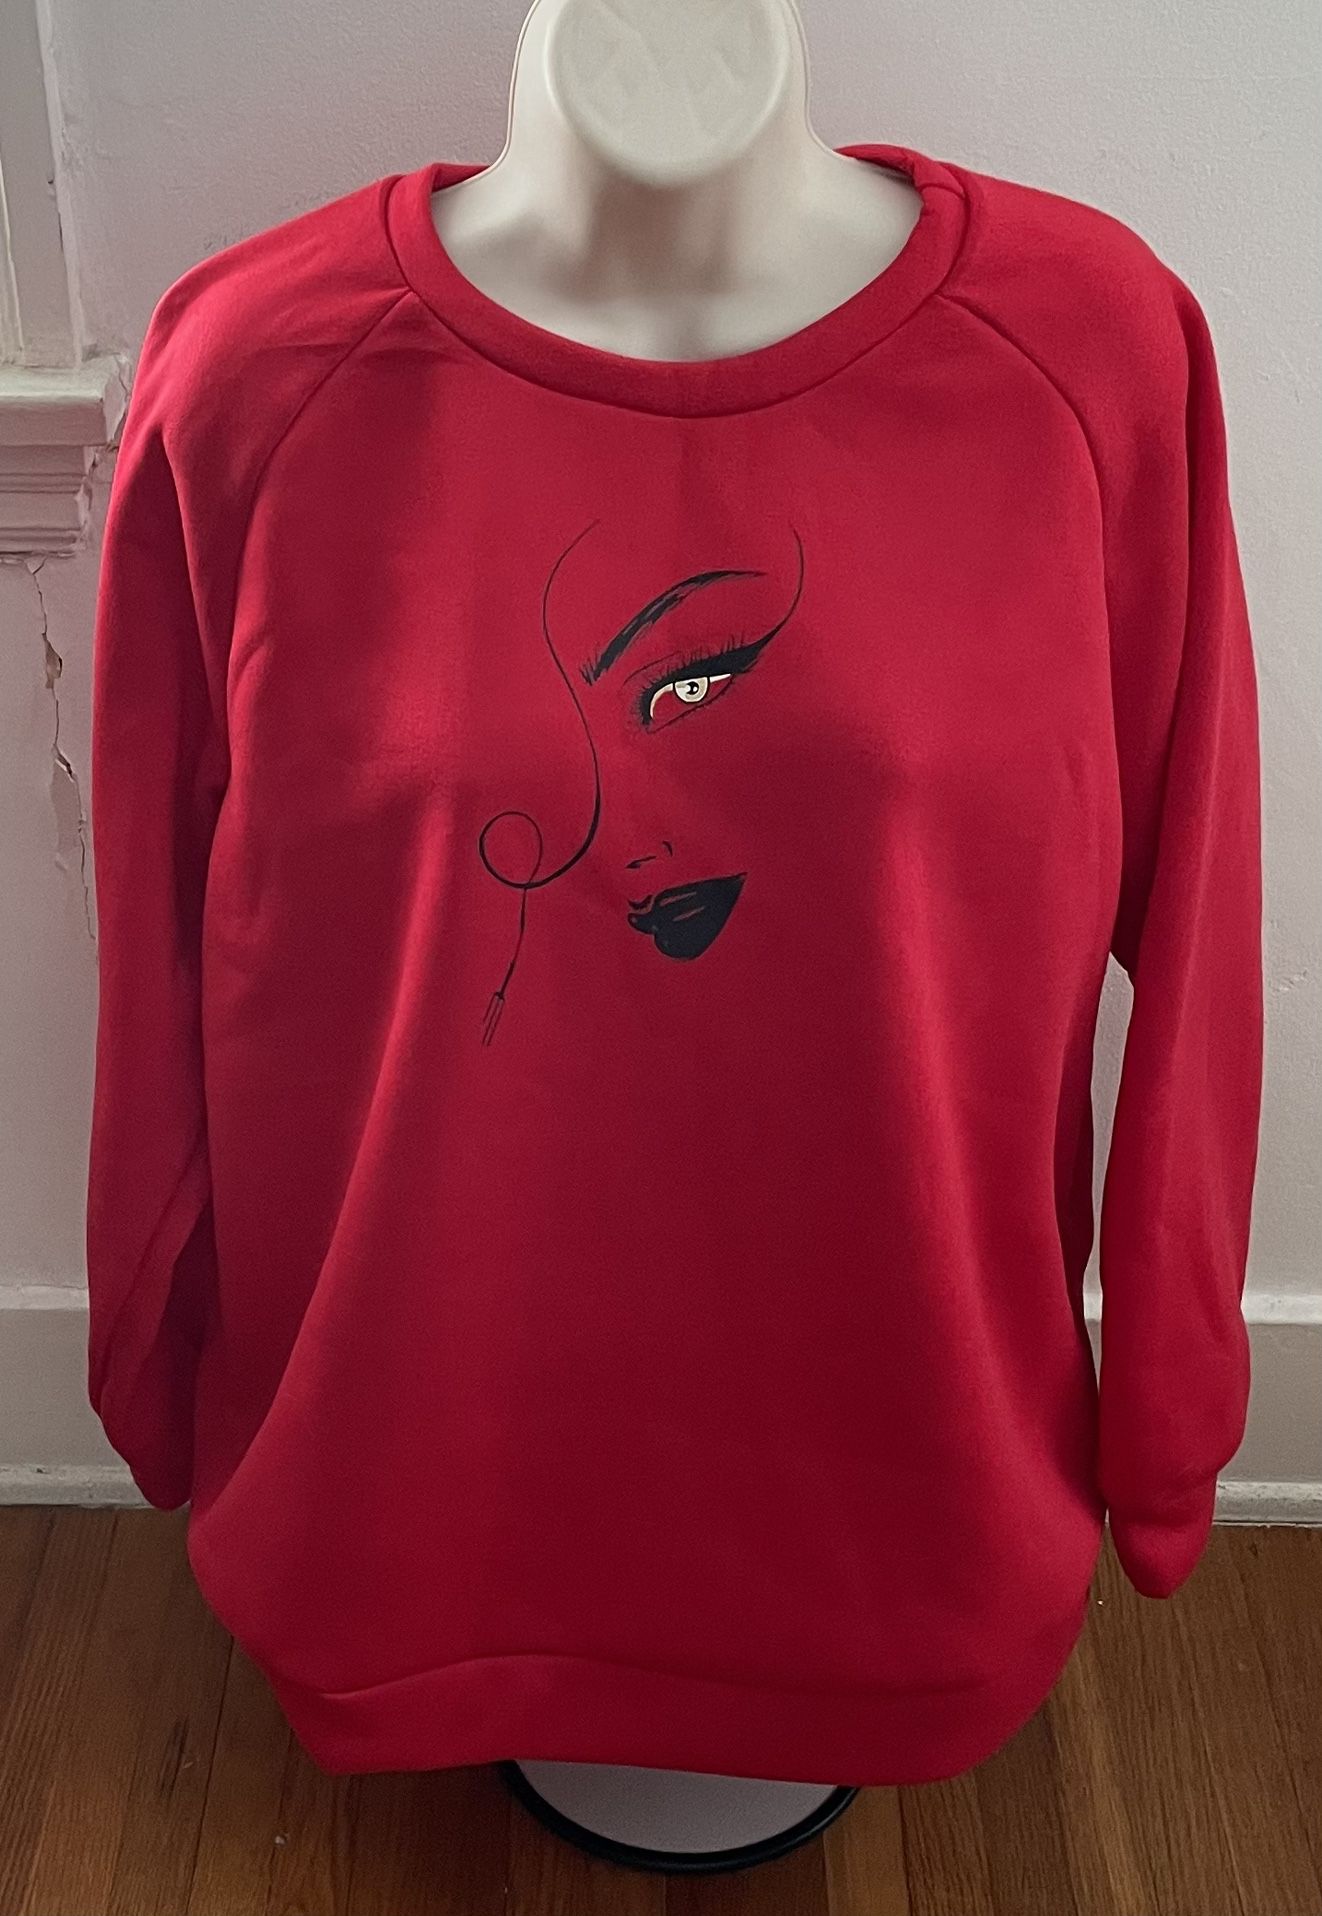 Women’s Red Fleece Face with Eye Crewneck Long Sleeve Sweater, size L